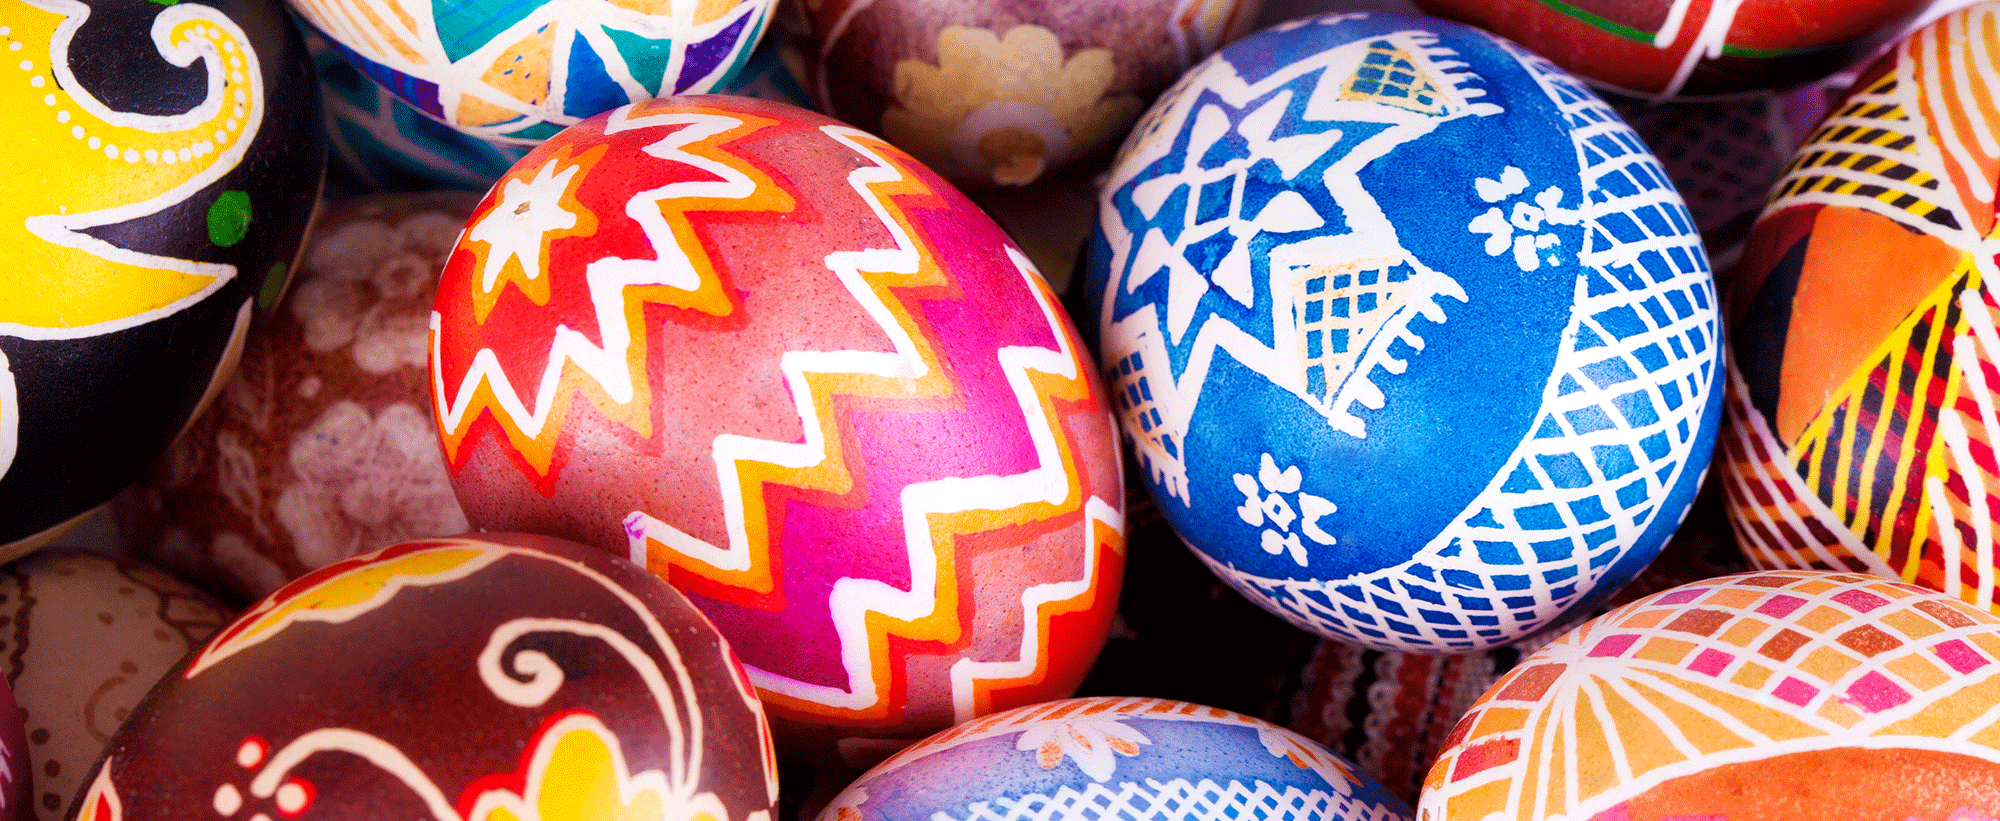 Eggs painted with bright patterns in red, orange, yellow and blue. 